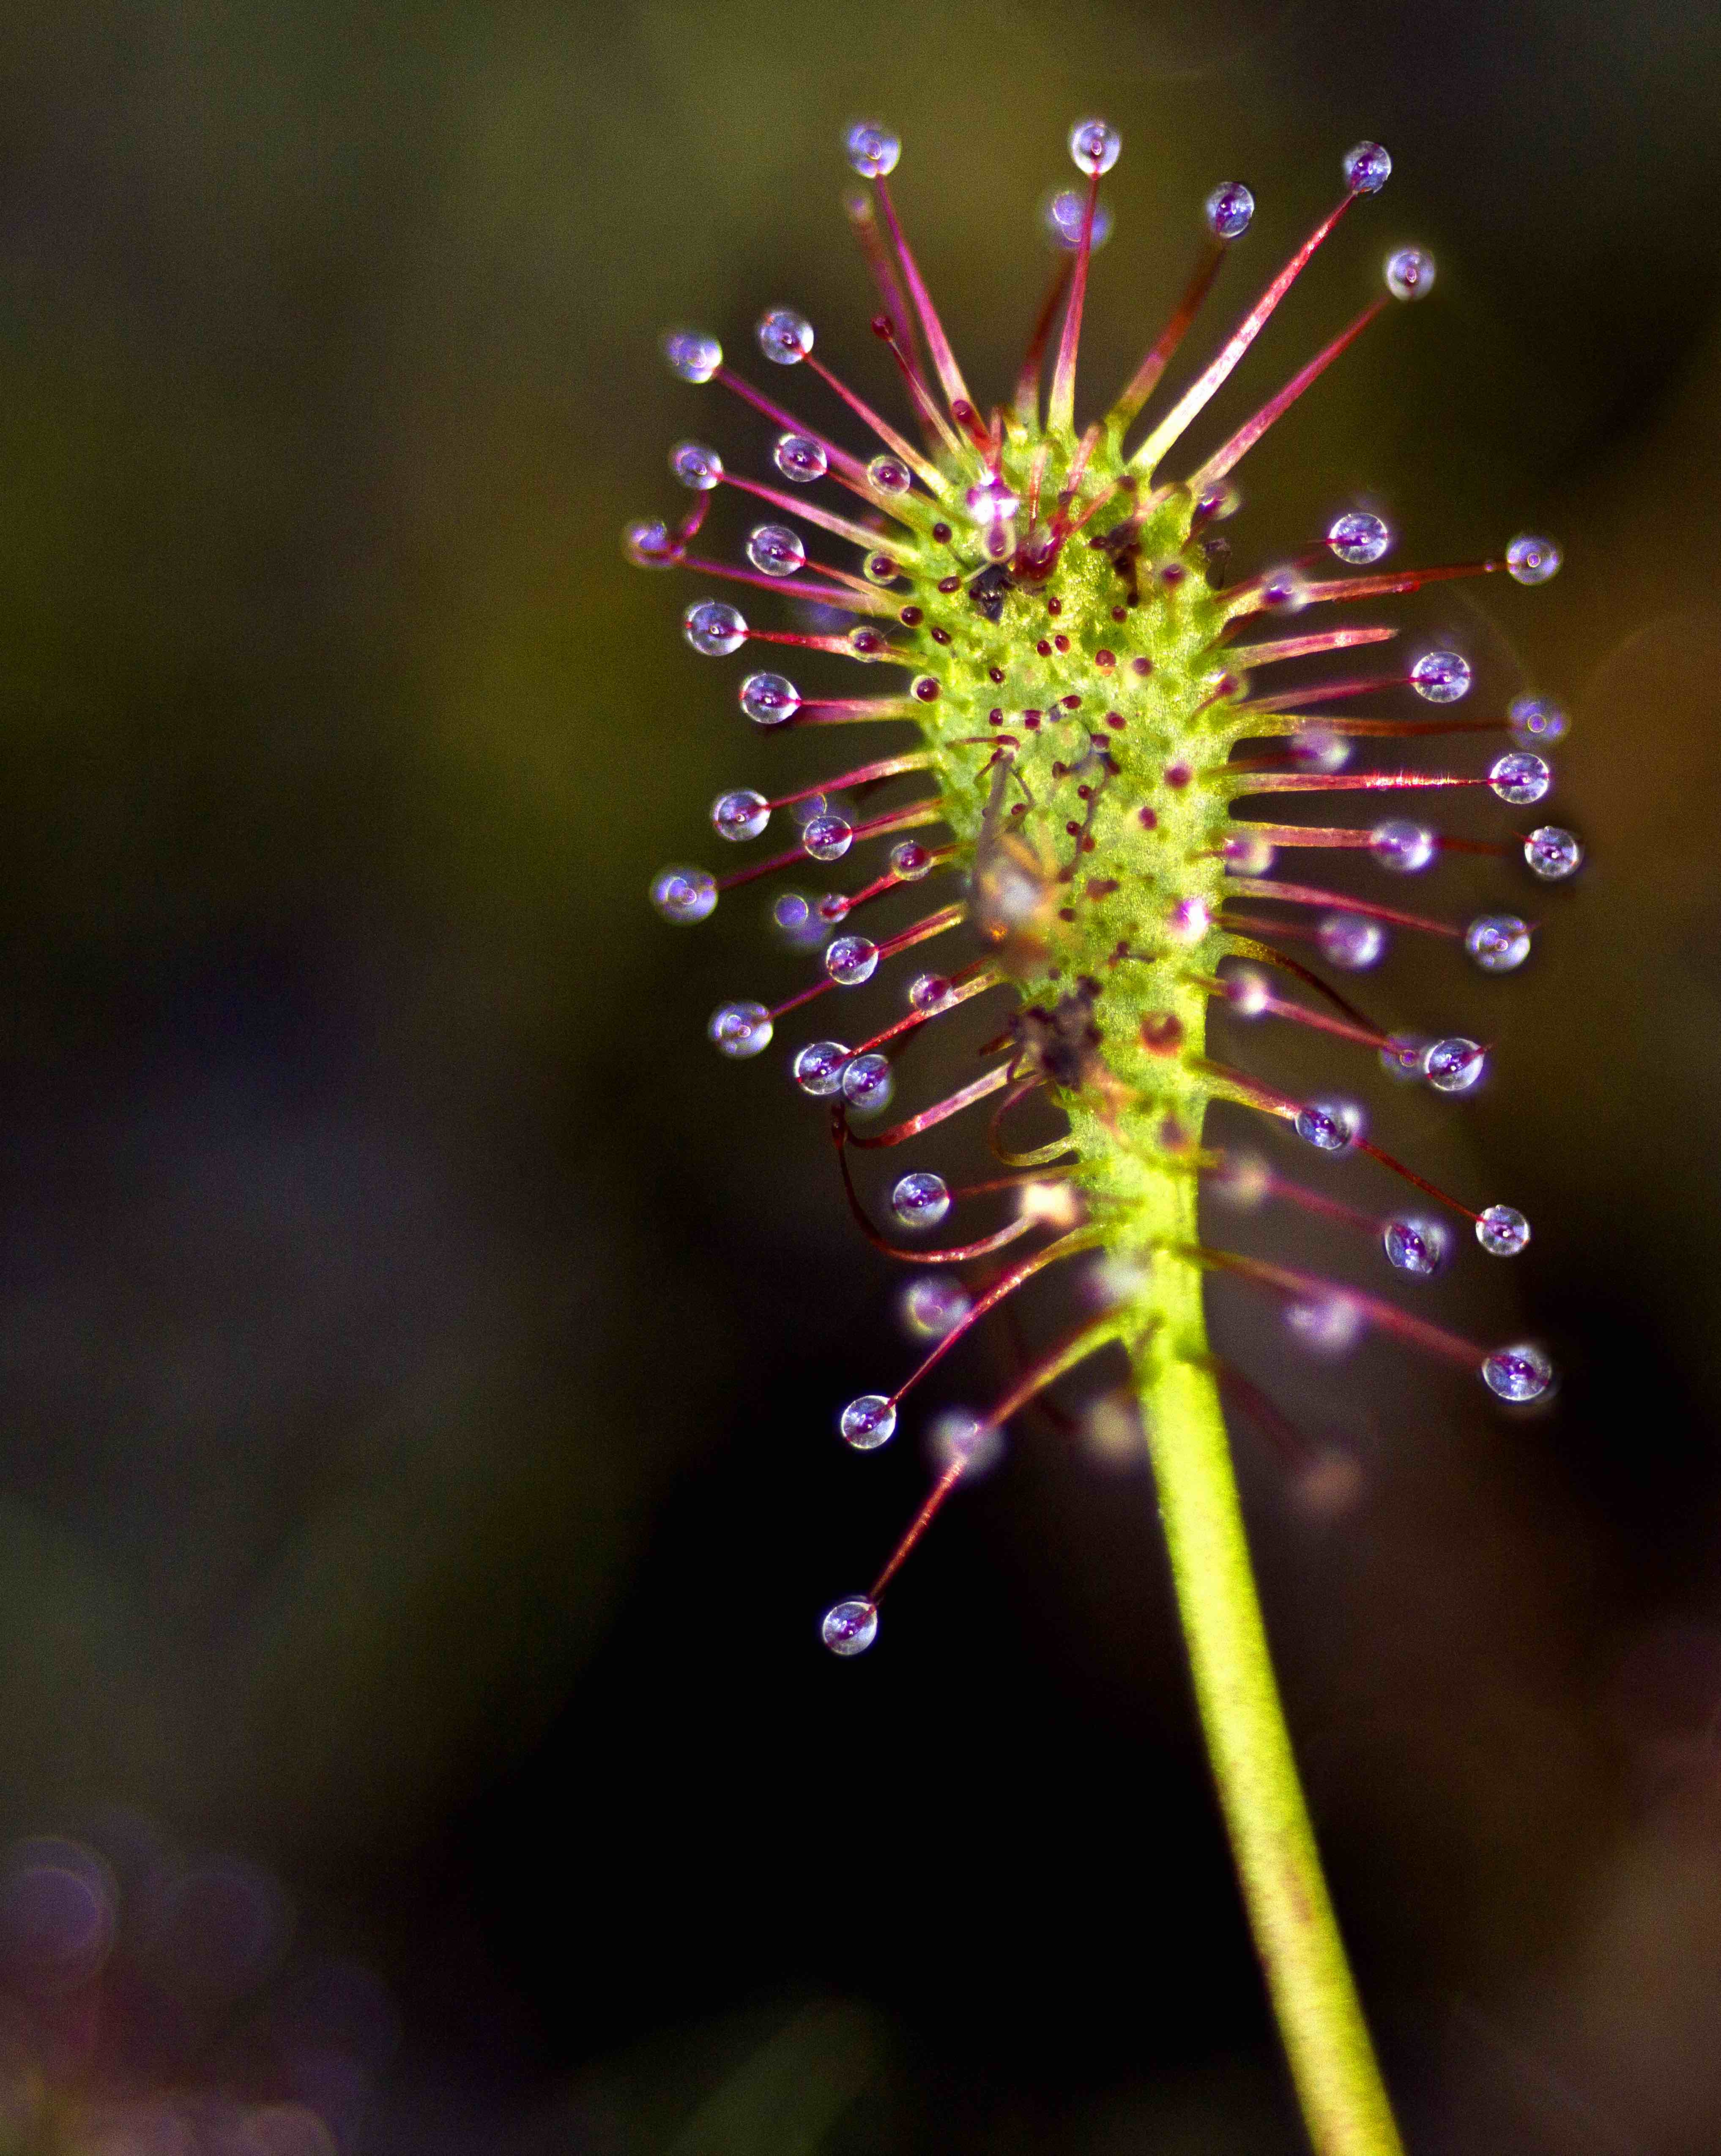 The Scientific Name is Drosera intermedia. You will likely hear them called Spoonleaf Sundew, Water Sundew. This picture shows the Narrow, filiform petiole with blade containing sticky glands. of Drosera intermedia